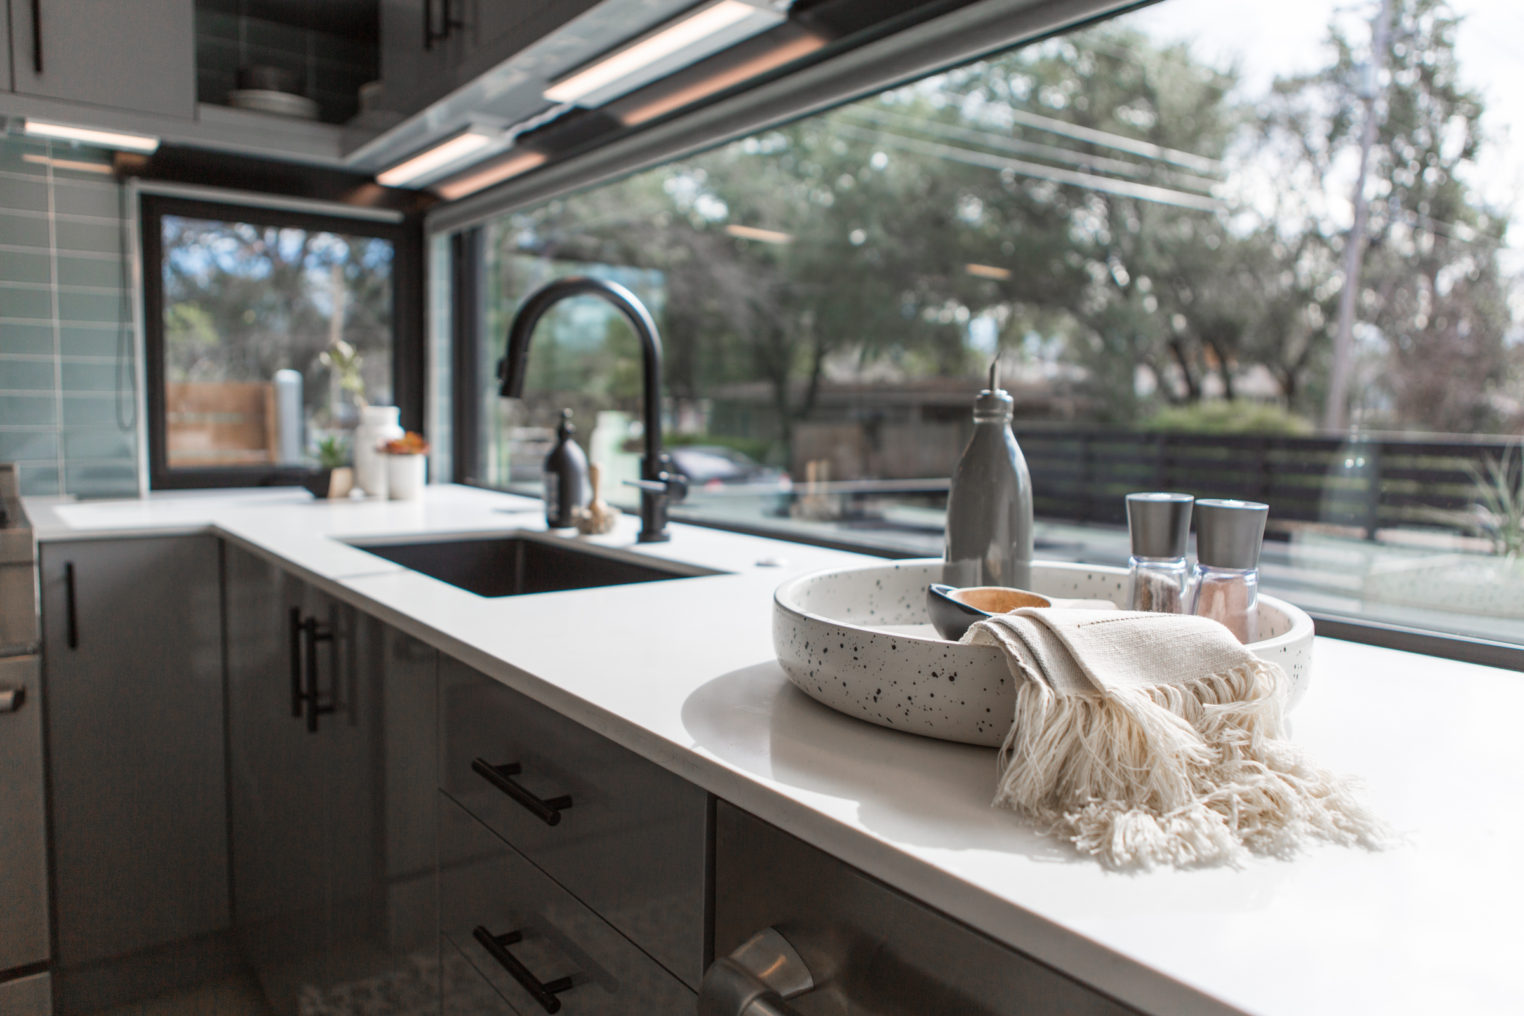 Kitchen in the Newcastle Home staged by Vazzo Spaces in the 2019 Austin Modern Home Tour. Be sure to check out The Pillow Goddess blog for details!